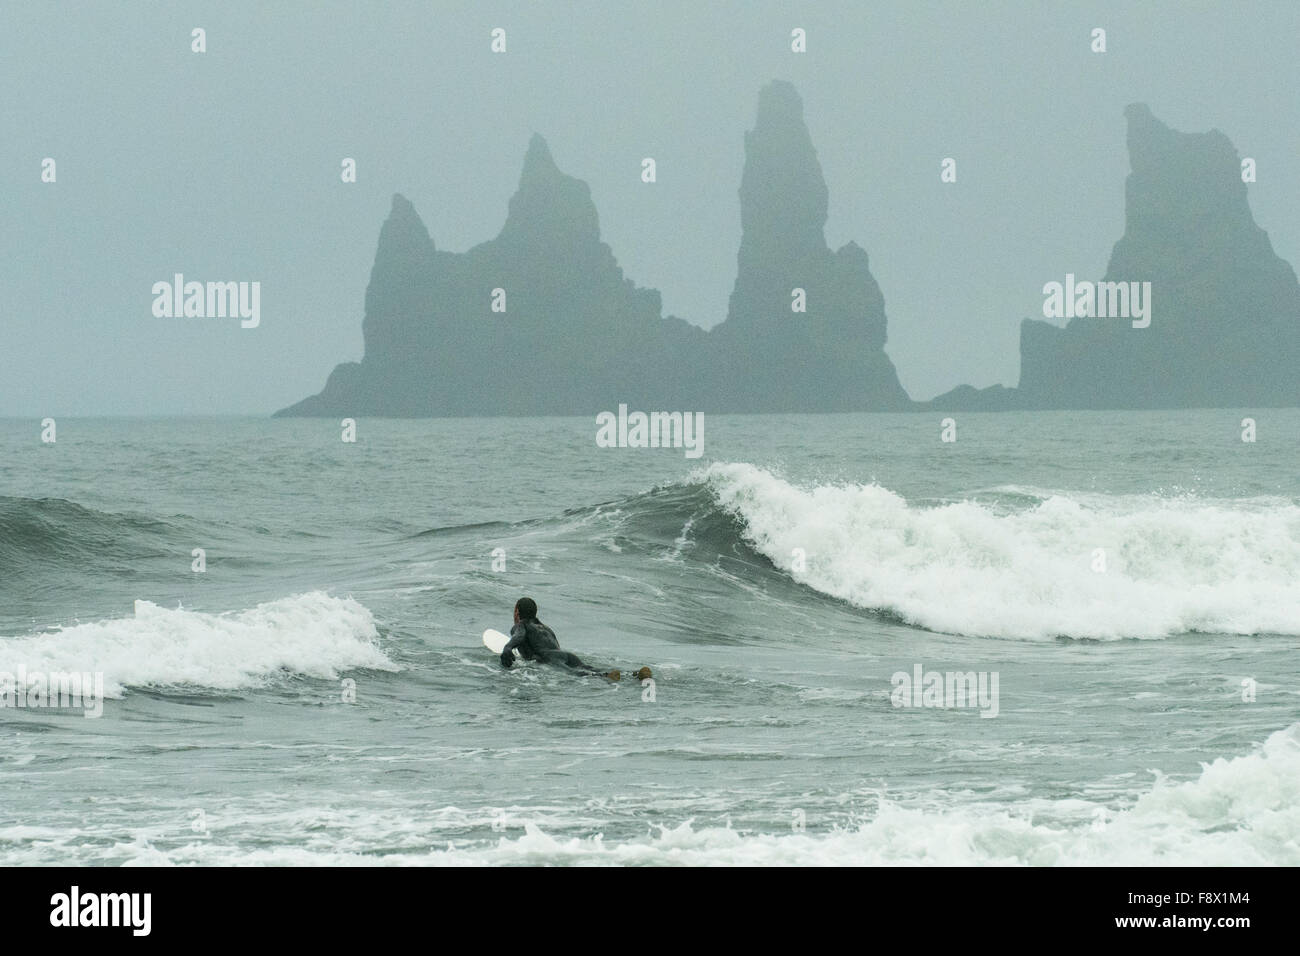 Outside of Vik. Man surfing waves at black sand beach with rocks in background. Stock Photo